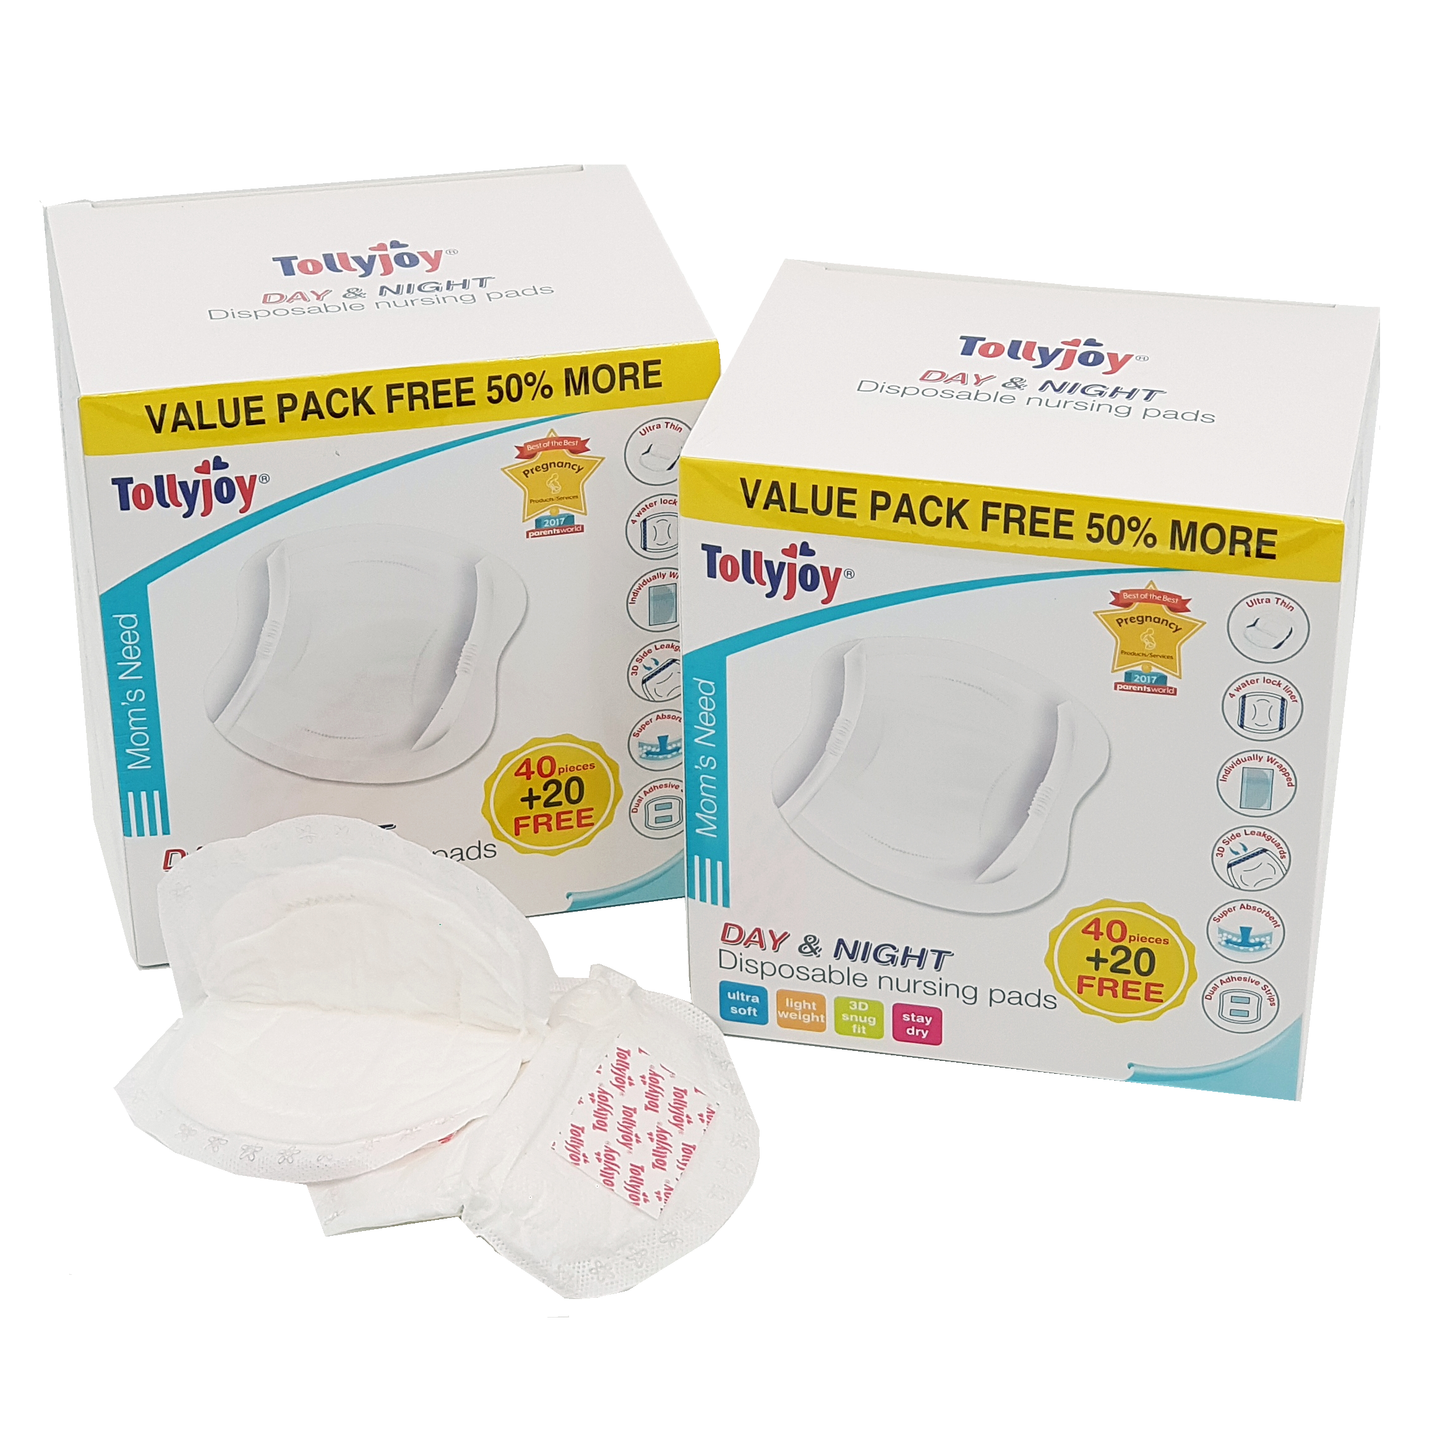 Tollyjoy Day & Night Disposable Nursing Pads (60pcs/box) Twin Pack